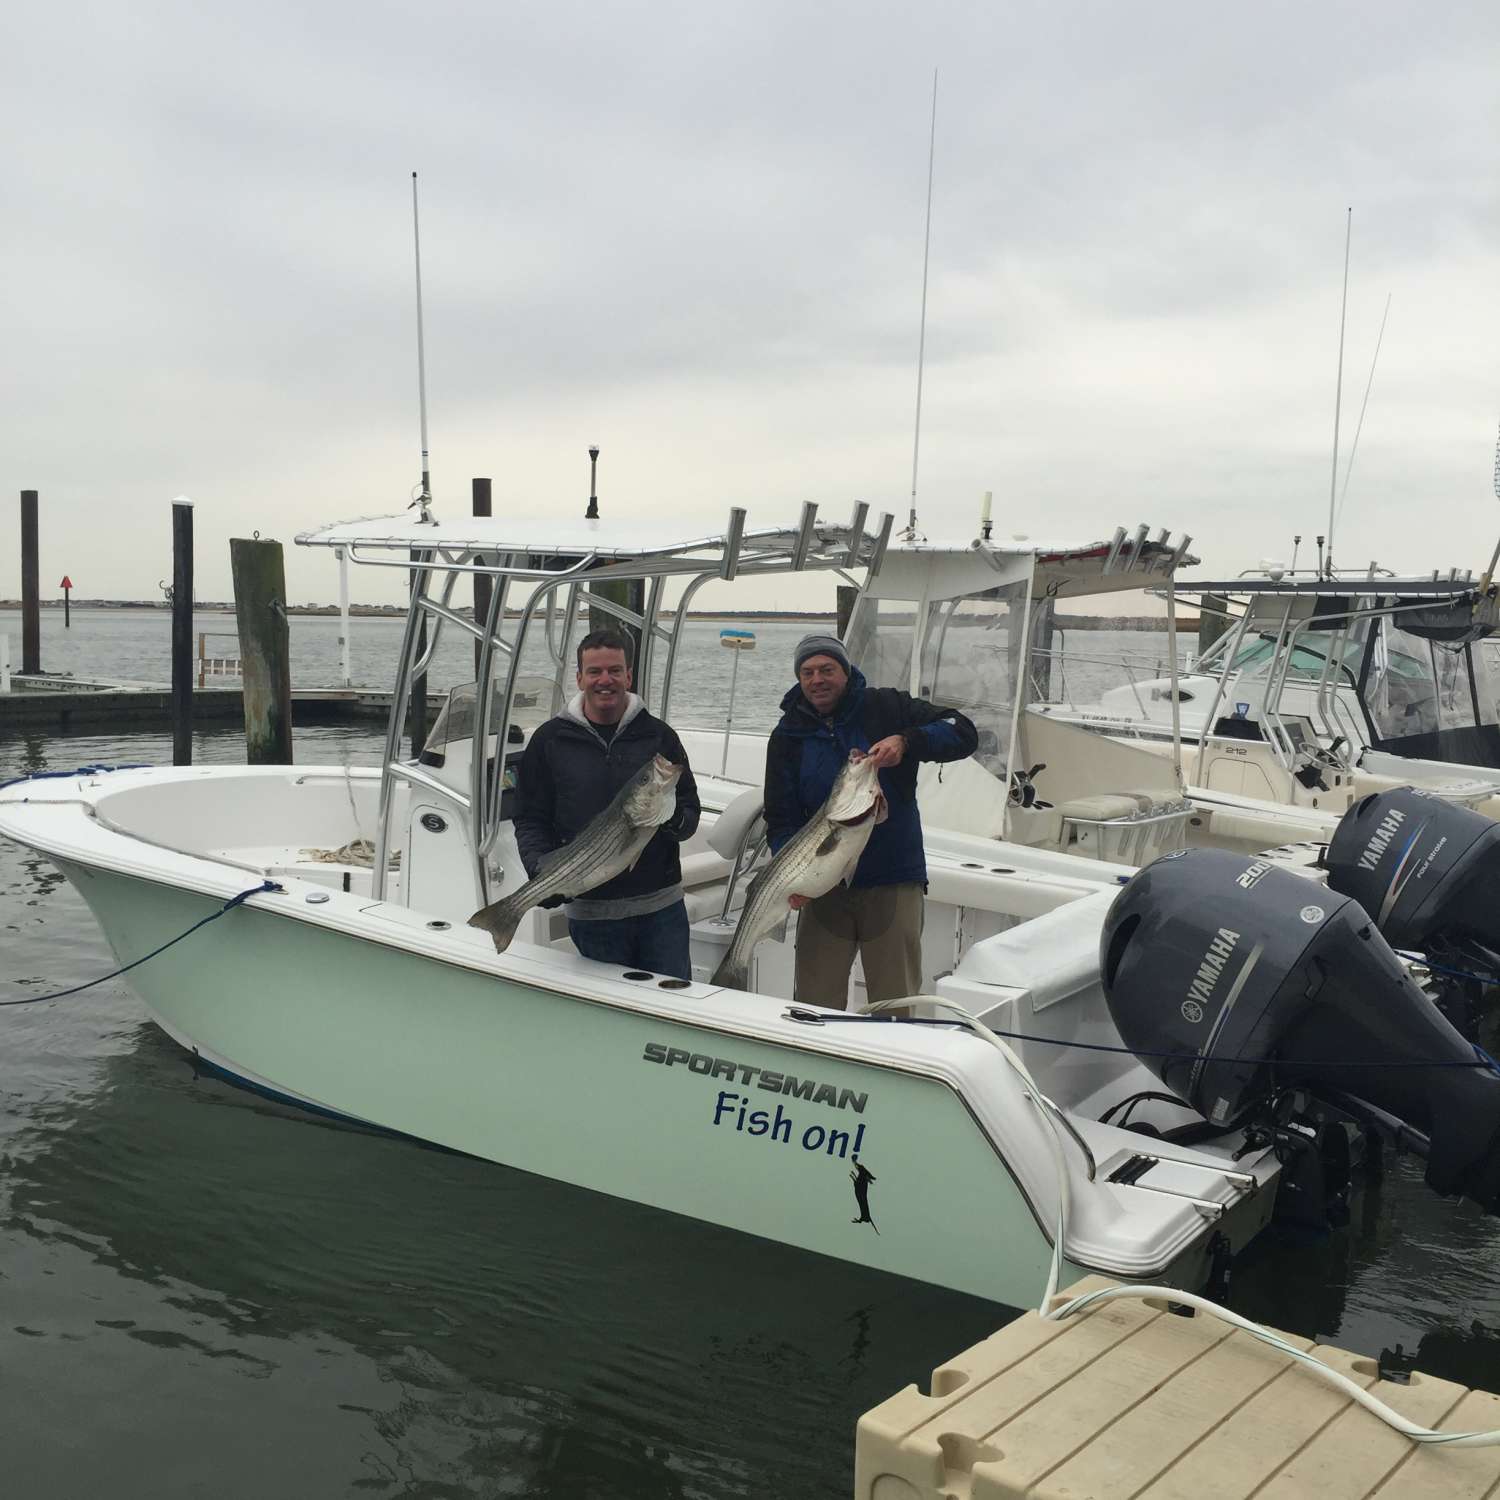 Sea Isle City, New Jersey. Boat is the brochure boat for 23 Open. 35" and 40" Stripers caught 1...